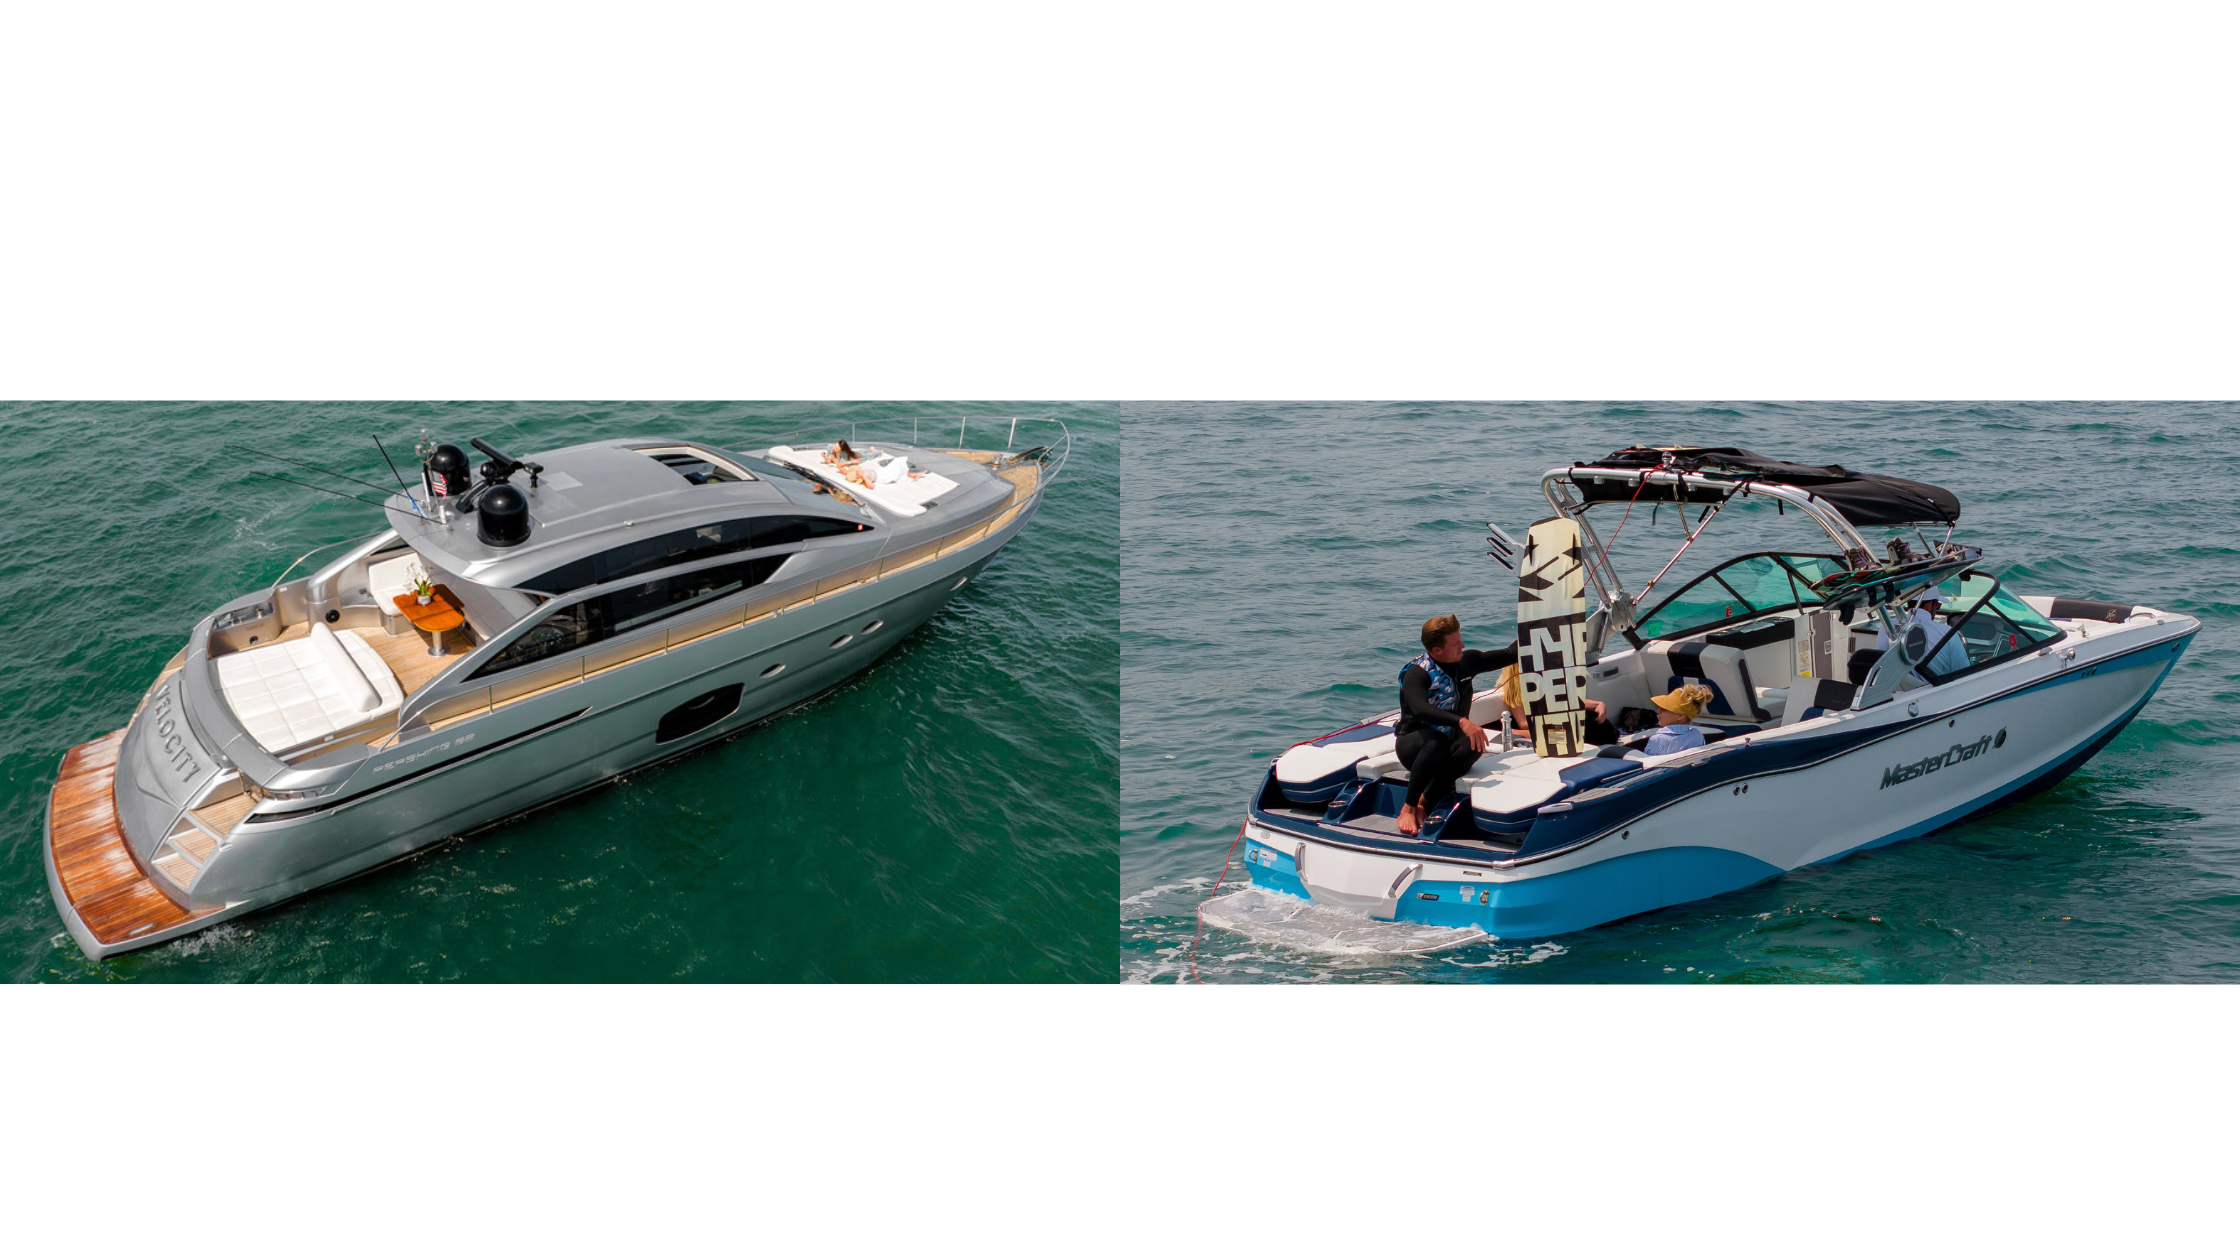 62' Pershing + Seabobs and 26' Mastercraft Tie-Up (25 Guests)s Image 1